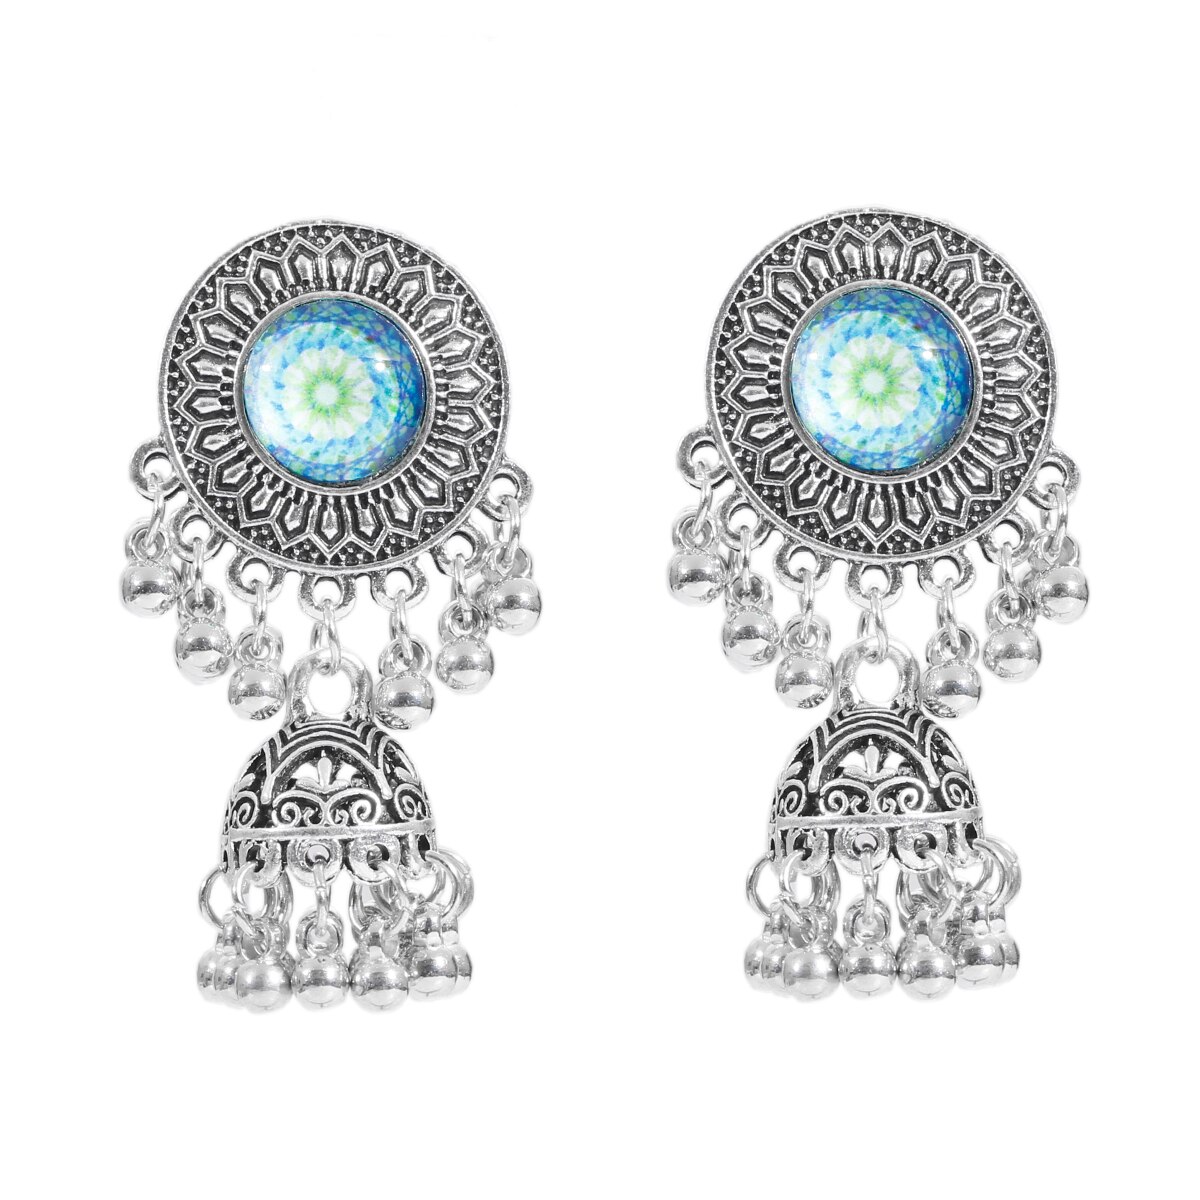 Classic-Vintage-Silver-Color-Alloy-Carved-Bollywood-Oxidized-Earrings-For-Women-Ethnic-Rose-Red-Jhum-1005003651700580-6